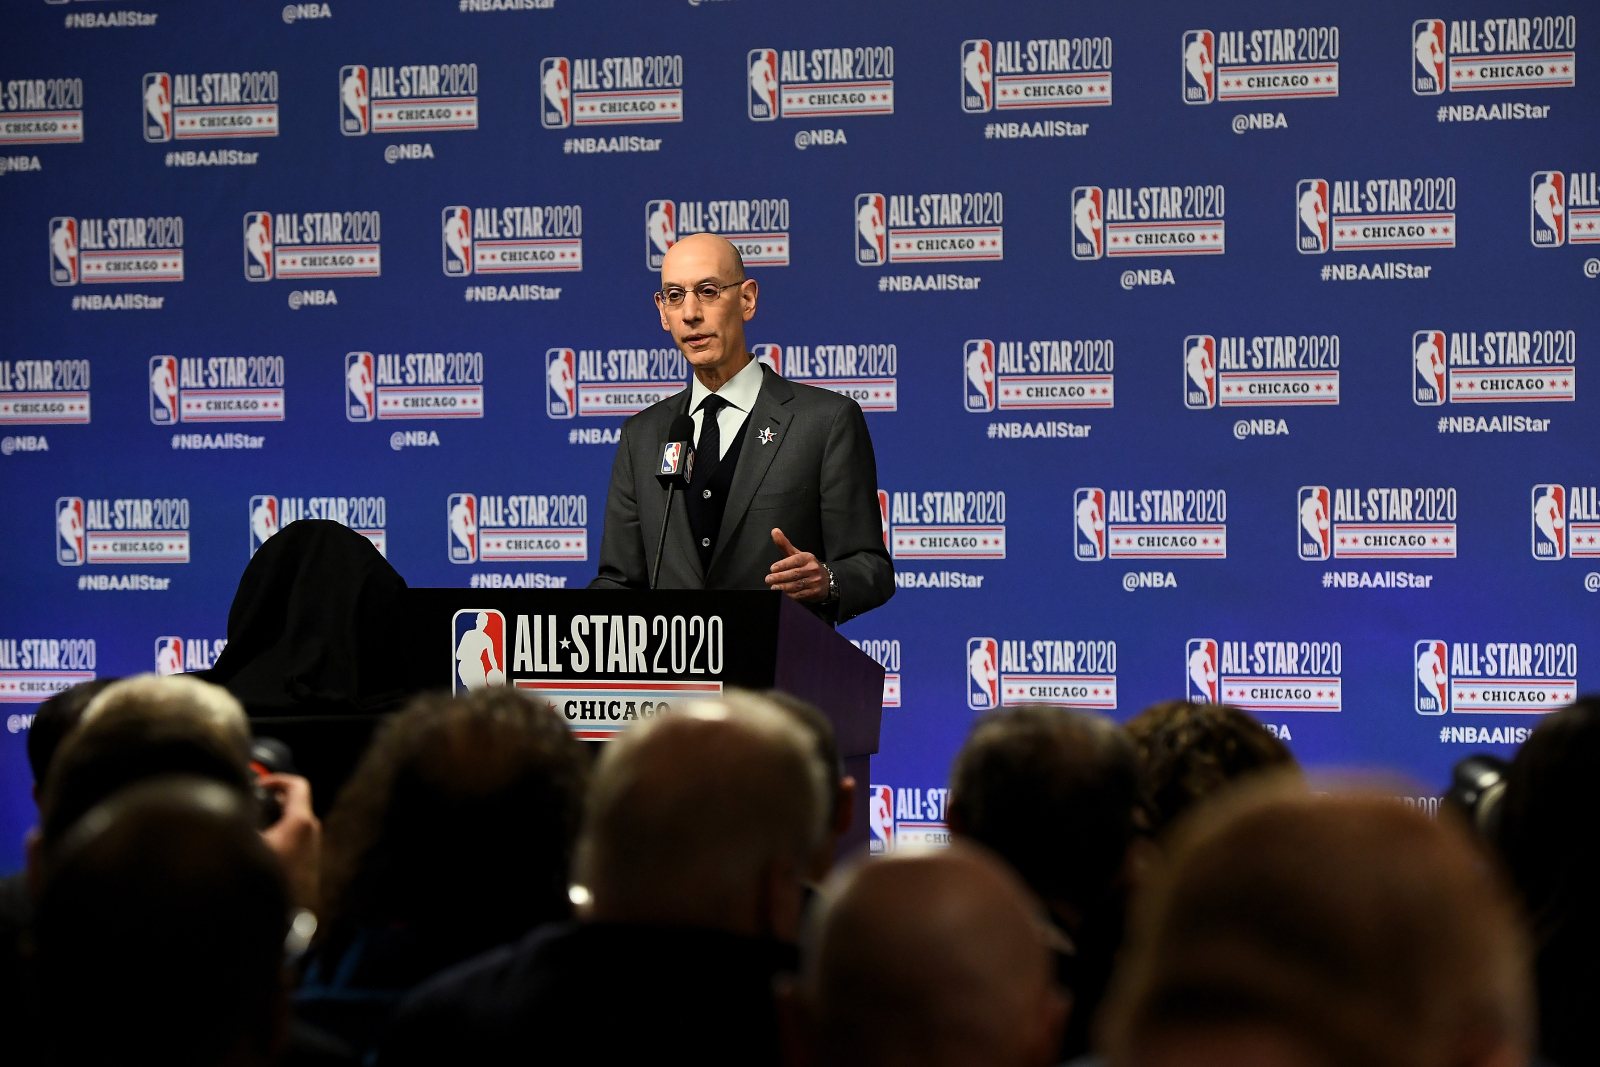 Adam Silver has proven his great leadership skills as NBA commissioner. One team owner recently praised him for saving thousands of lives.